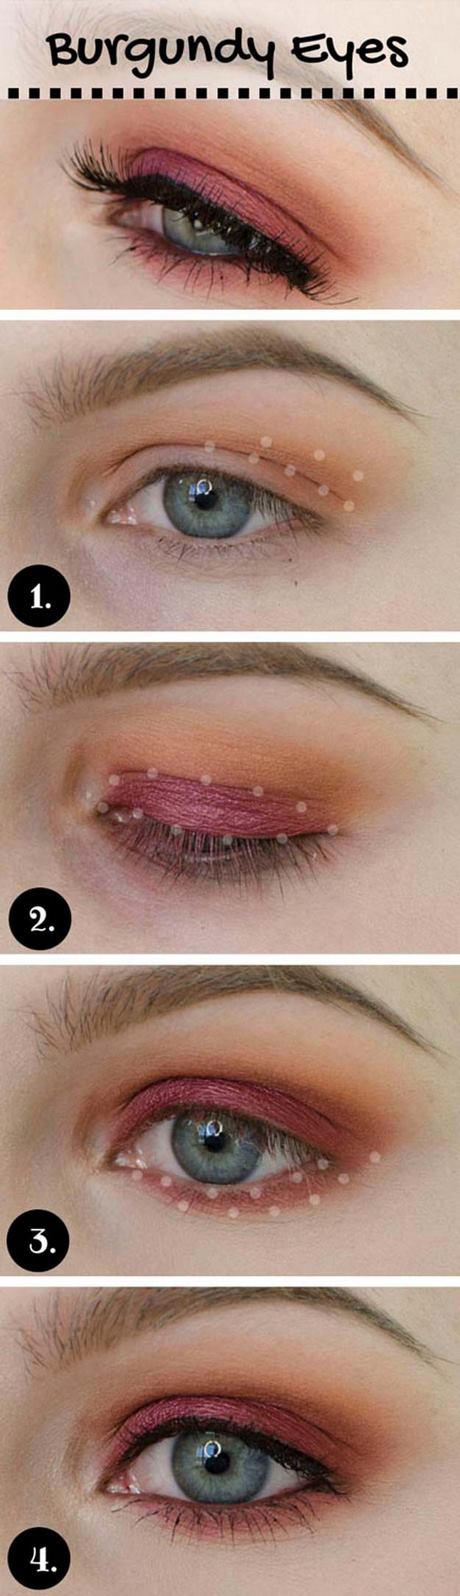 how-to-do-perfect-eye-makeup-34_2 Hoe perfect oog make-up te doen